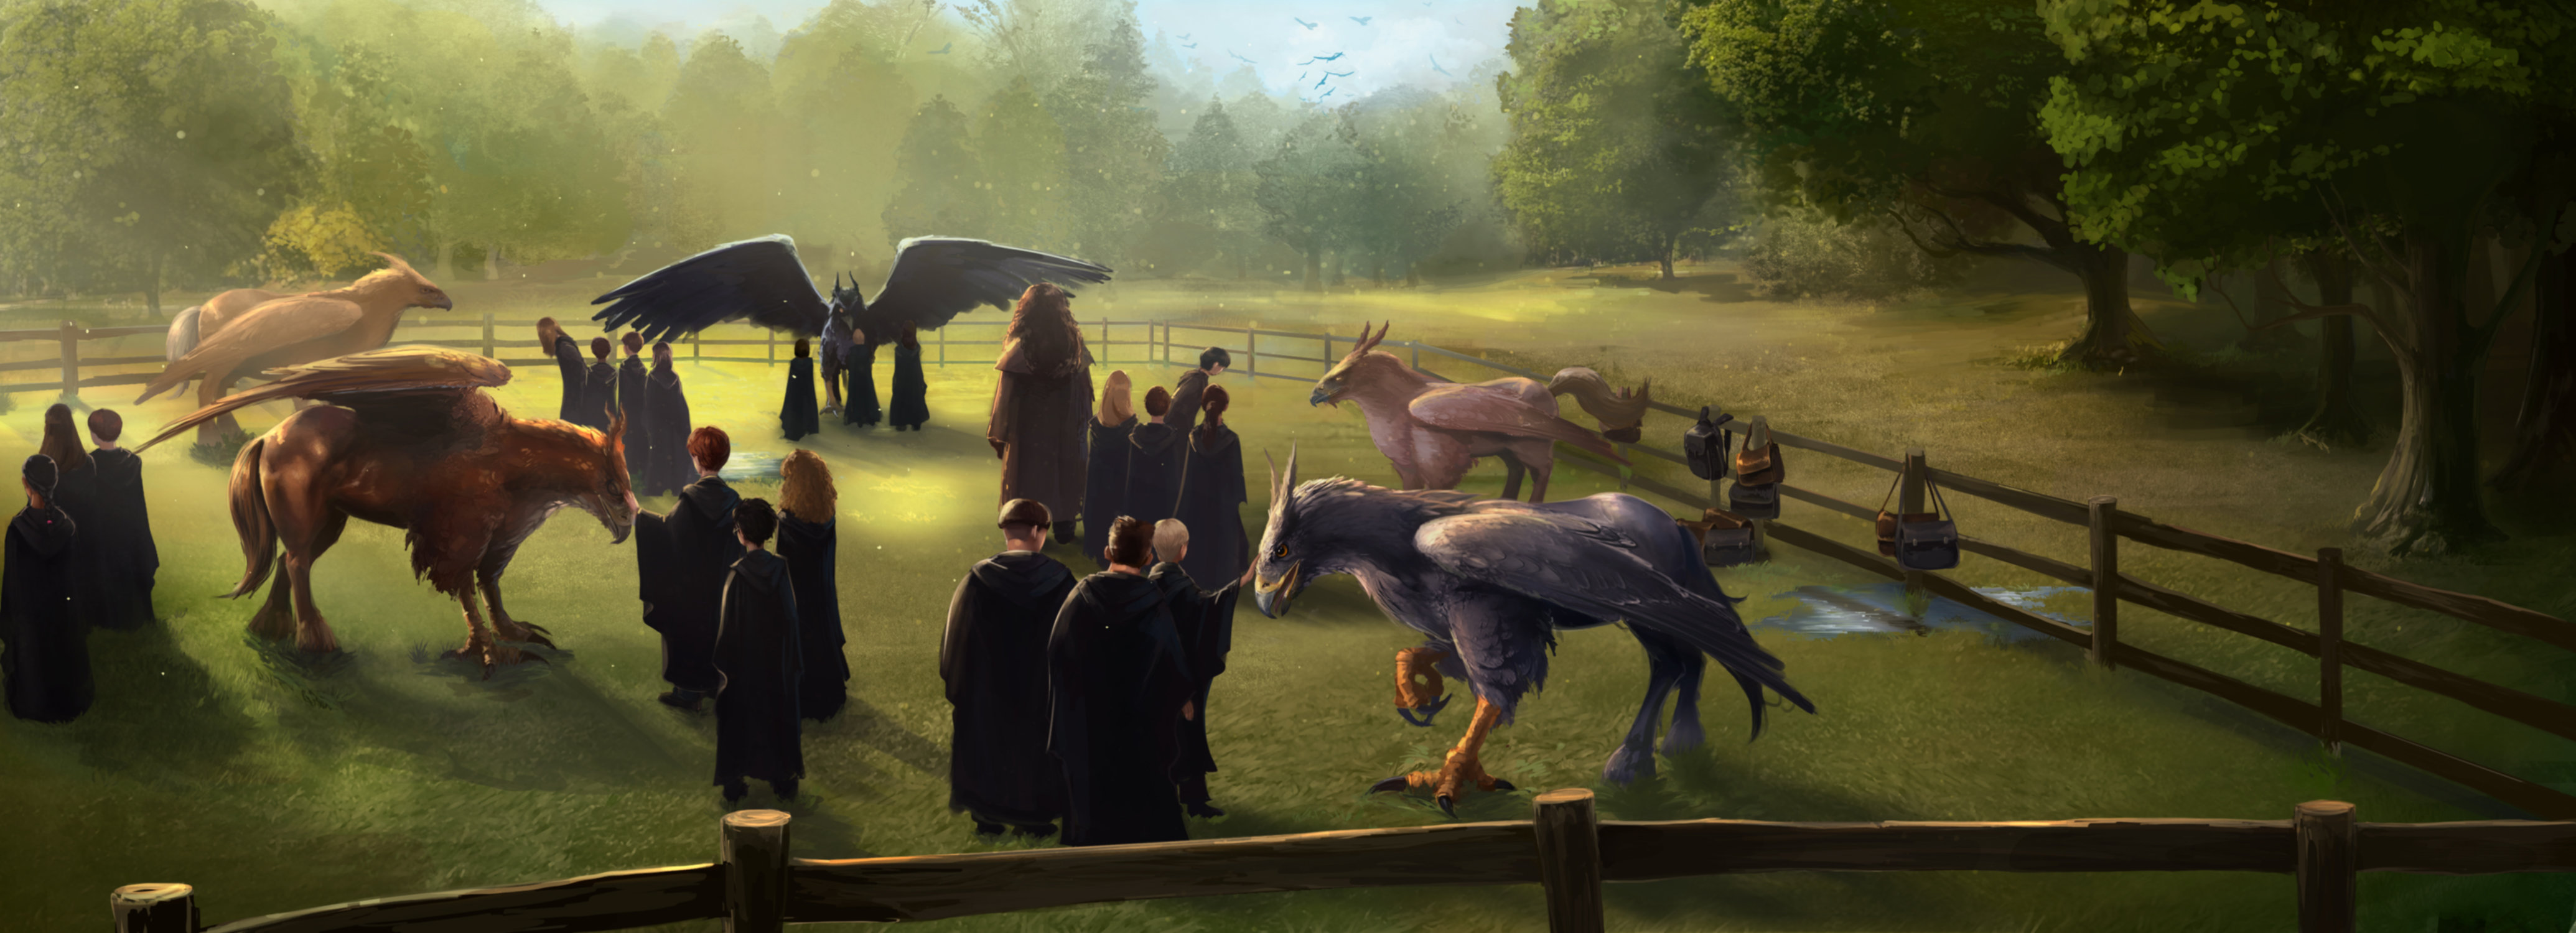 Hagrid's First Lesson by Atomhawk